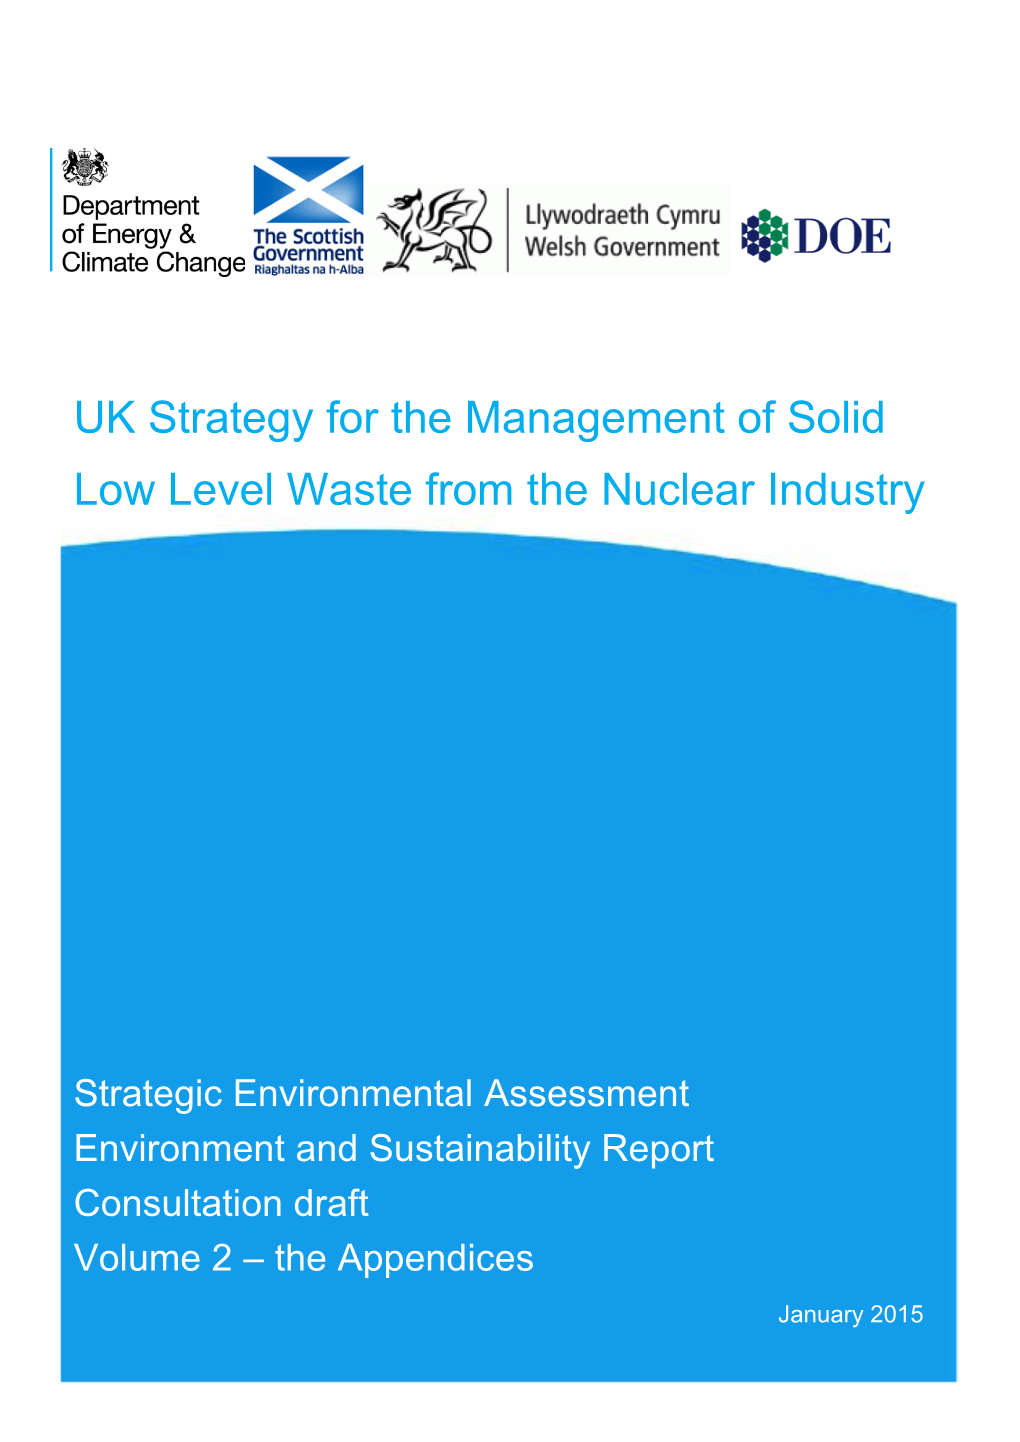 UK Strategy for the Management of Solid Low Level Waste from the Nuclear Industry